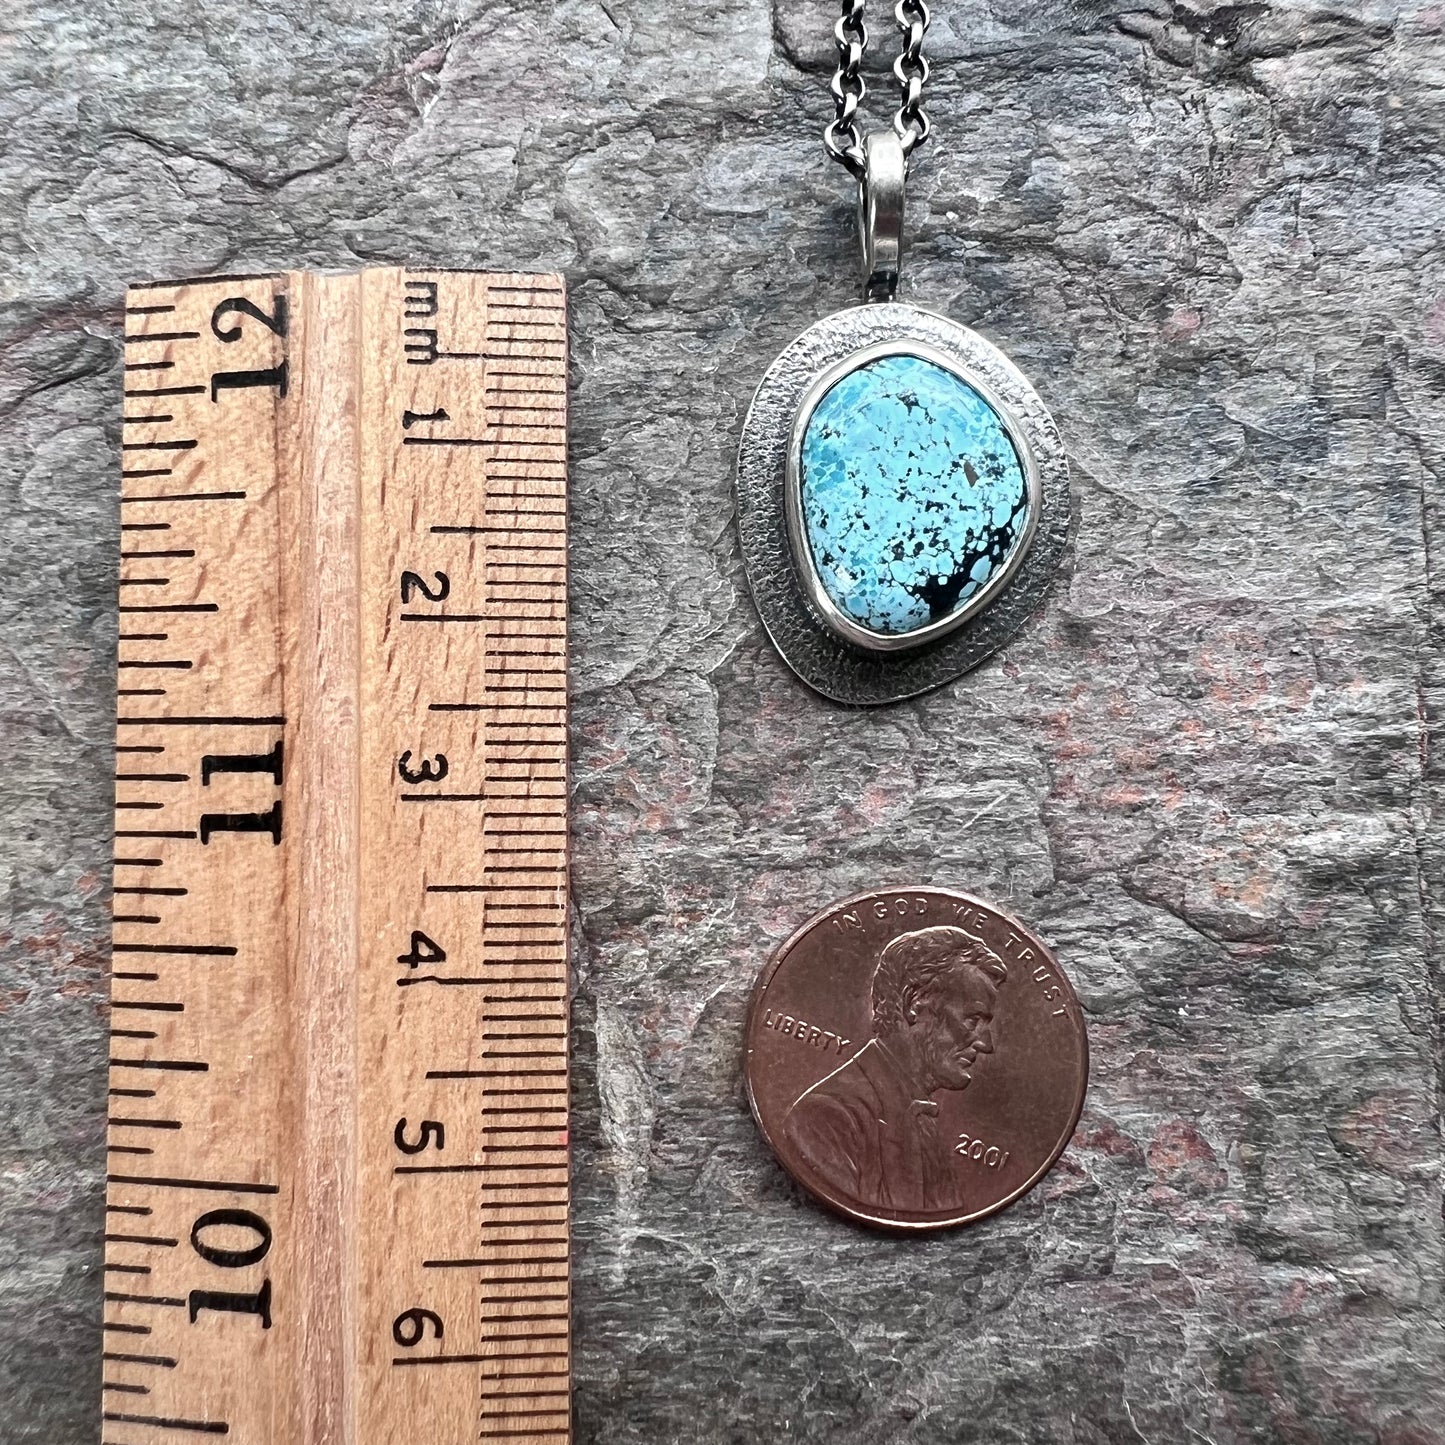 Sterling Silver Turquoise Freeform Pendant - One-of-a-Kind Turquoise Necklace